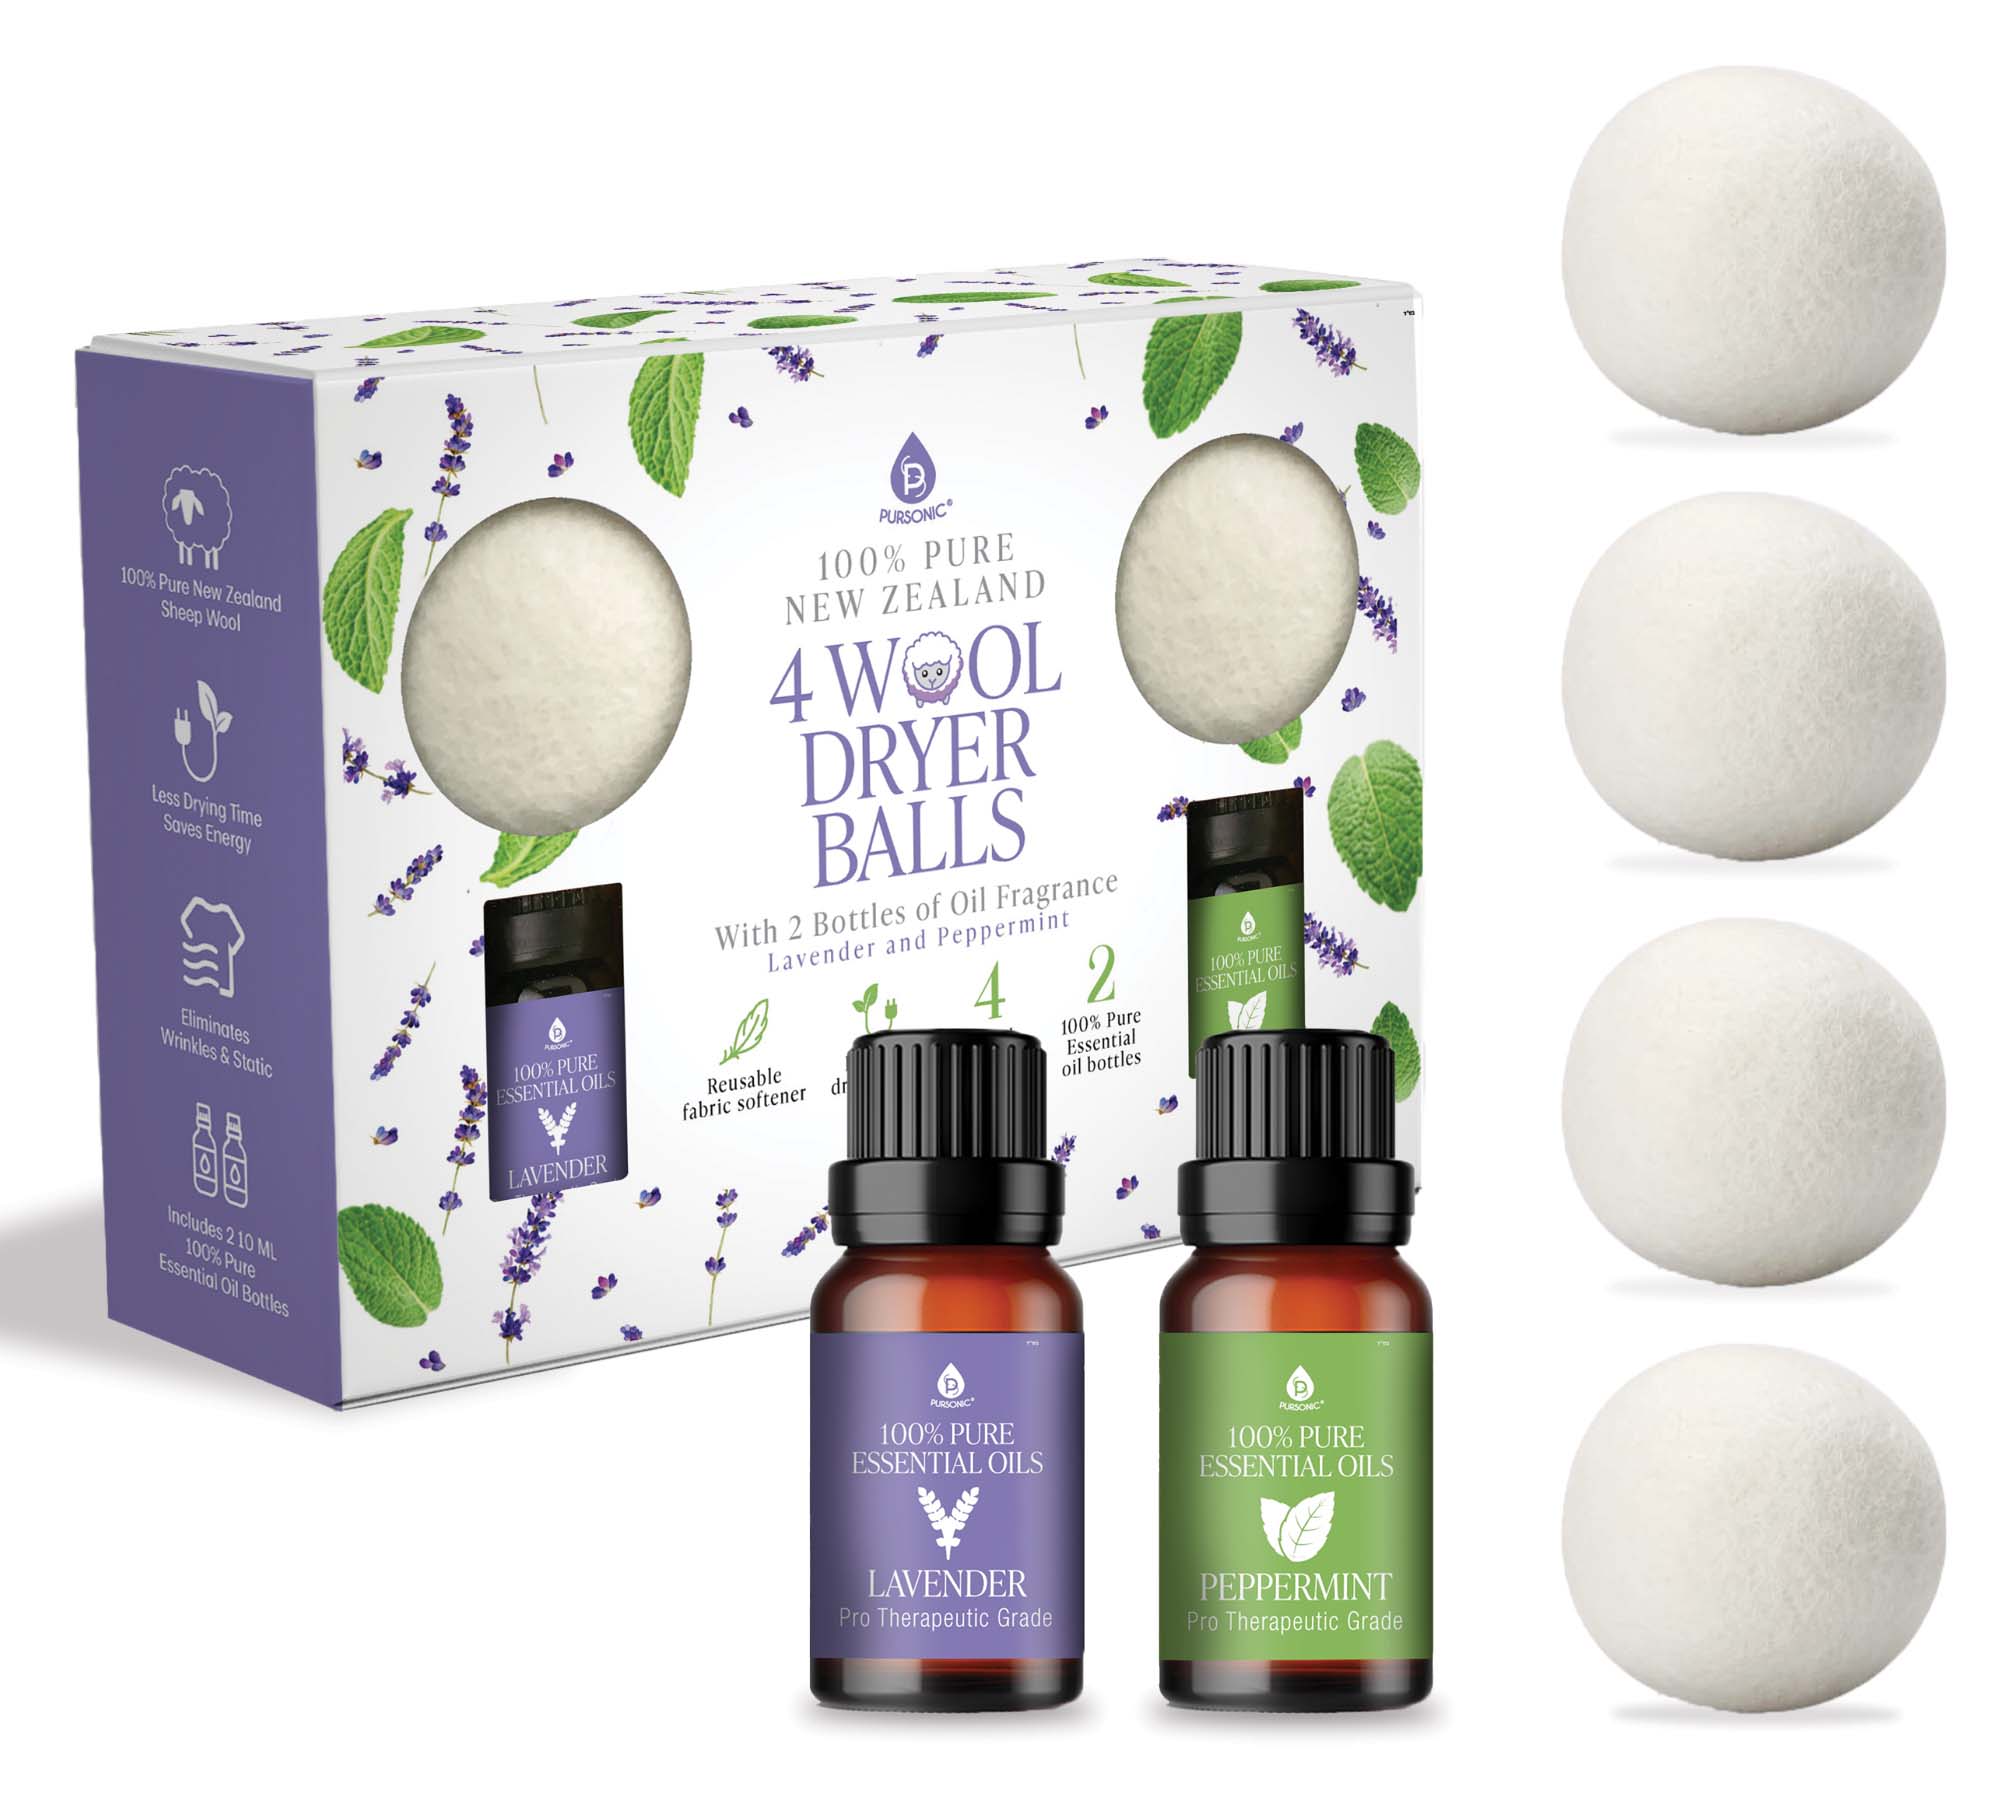 Pursonic Wool Dryer Balls Bundle - Reusable Laundry Balls Made from Pure New Zealand Wool - Includes Lavender & Peppermint Oils